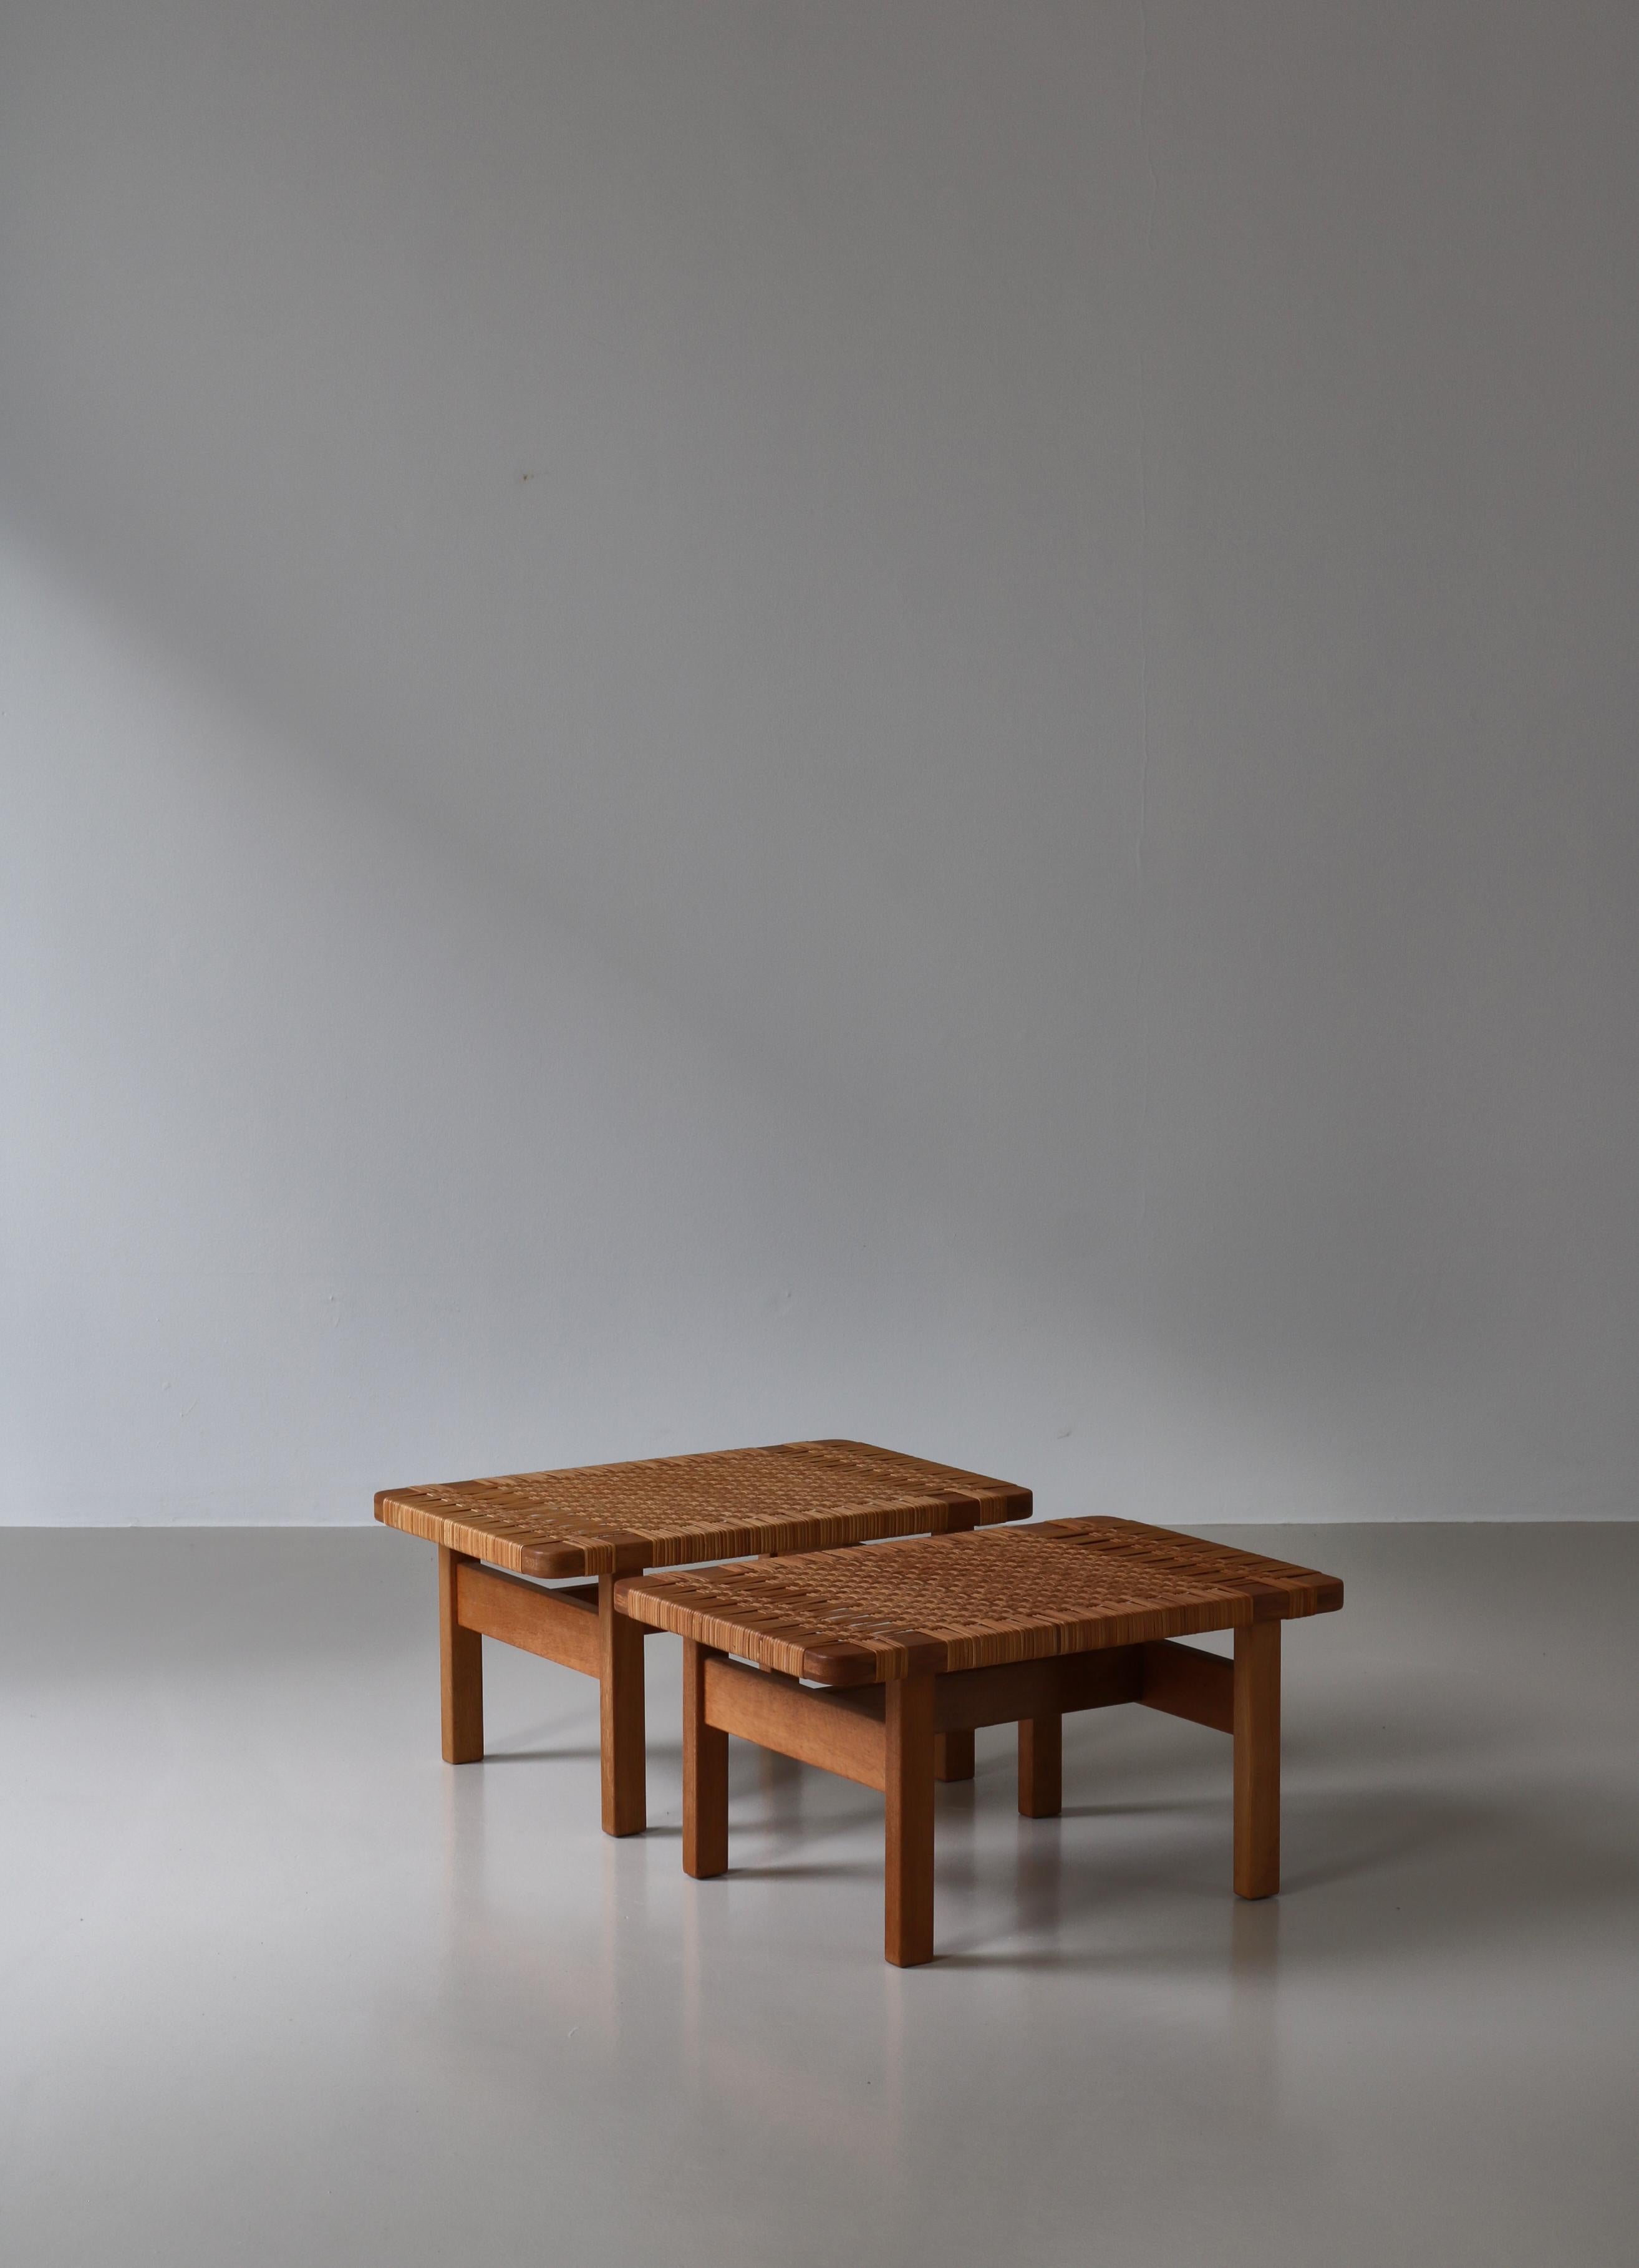 Hand-Woven Borge Mogensen Set of Side Tables/Benches in Oak and Rattan Cane, 1960s, Denmark For Sale